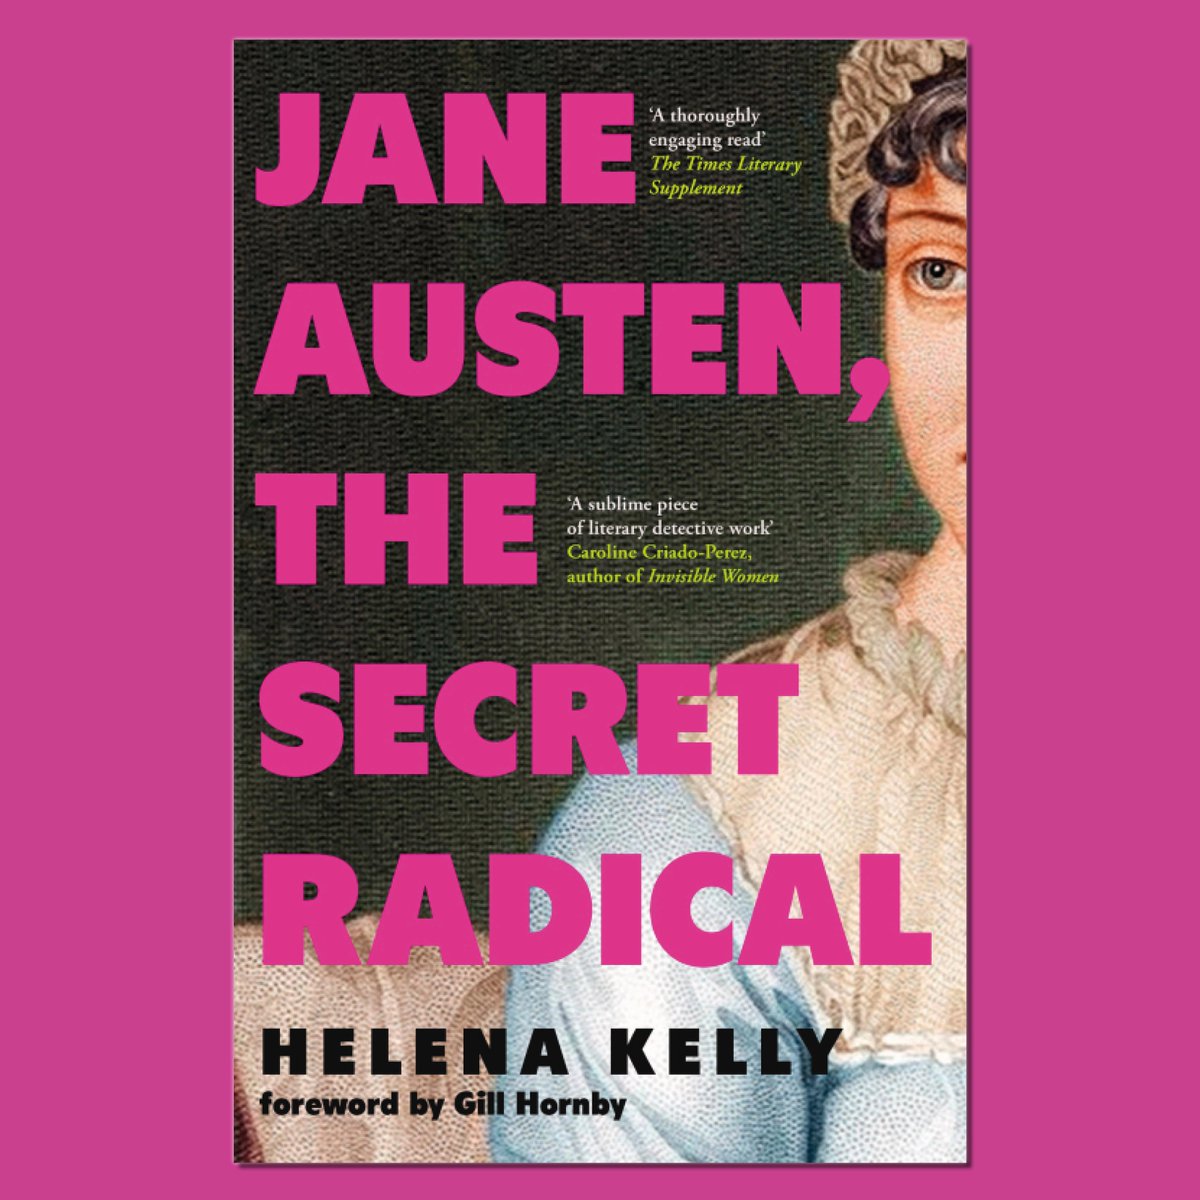 Delighted to be able to show you the new UK version of Jane Austen, the Secret Radical! Available this July, with a foreword by one of the loveliest of Janeites, @GillHornby Design is by @annabookdesign who also did the stunning UK The Life and Lies of Charles Dickens cover.